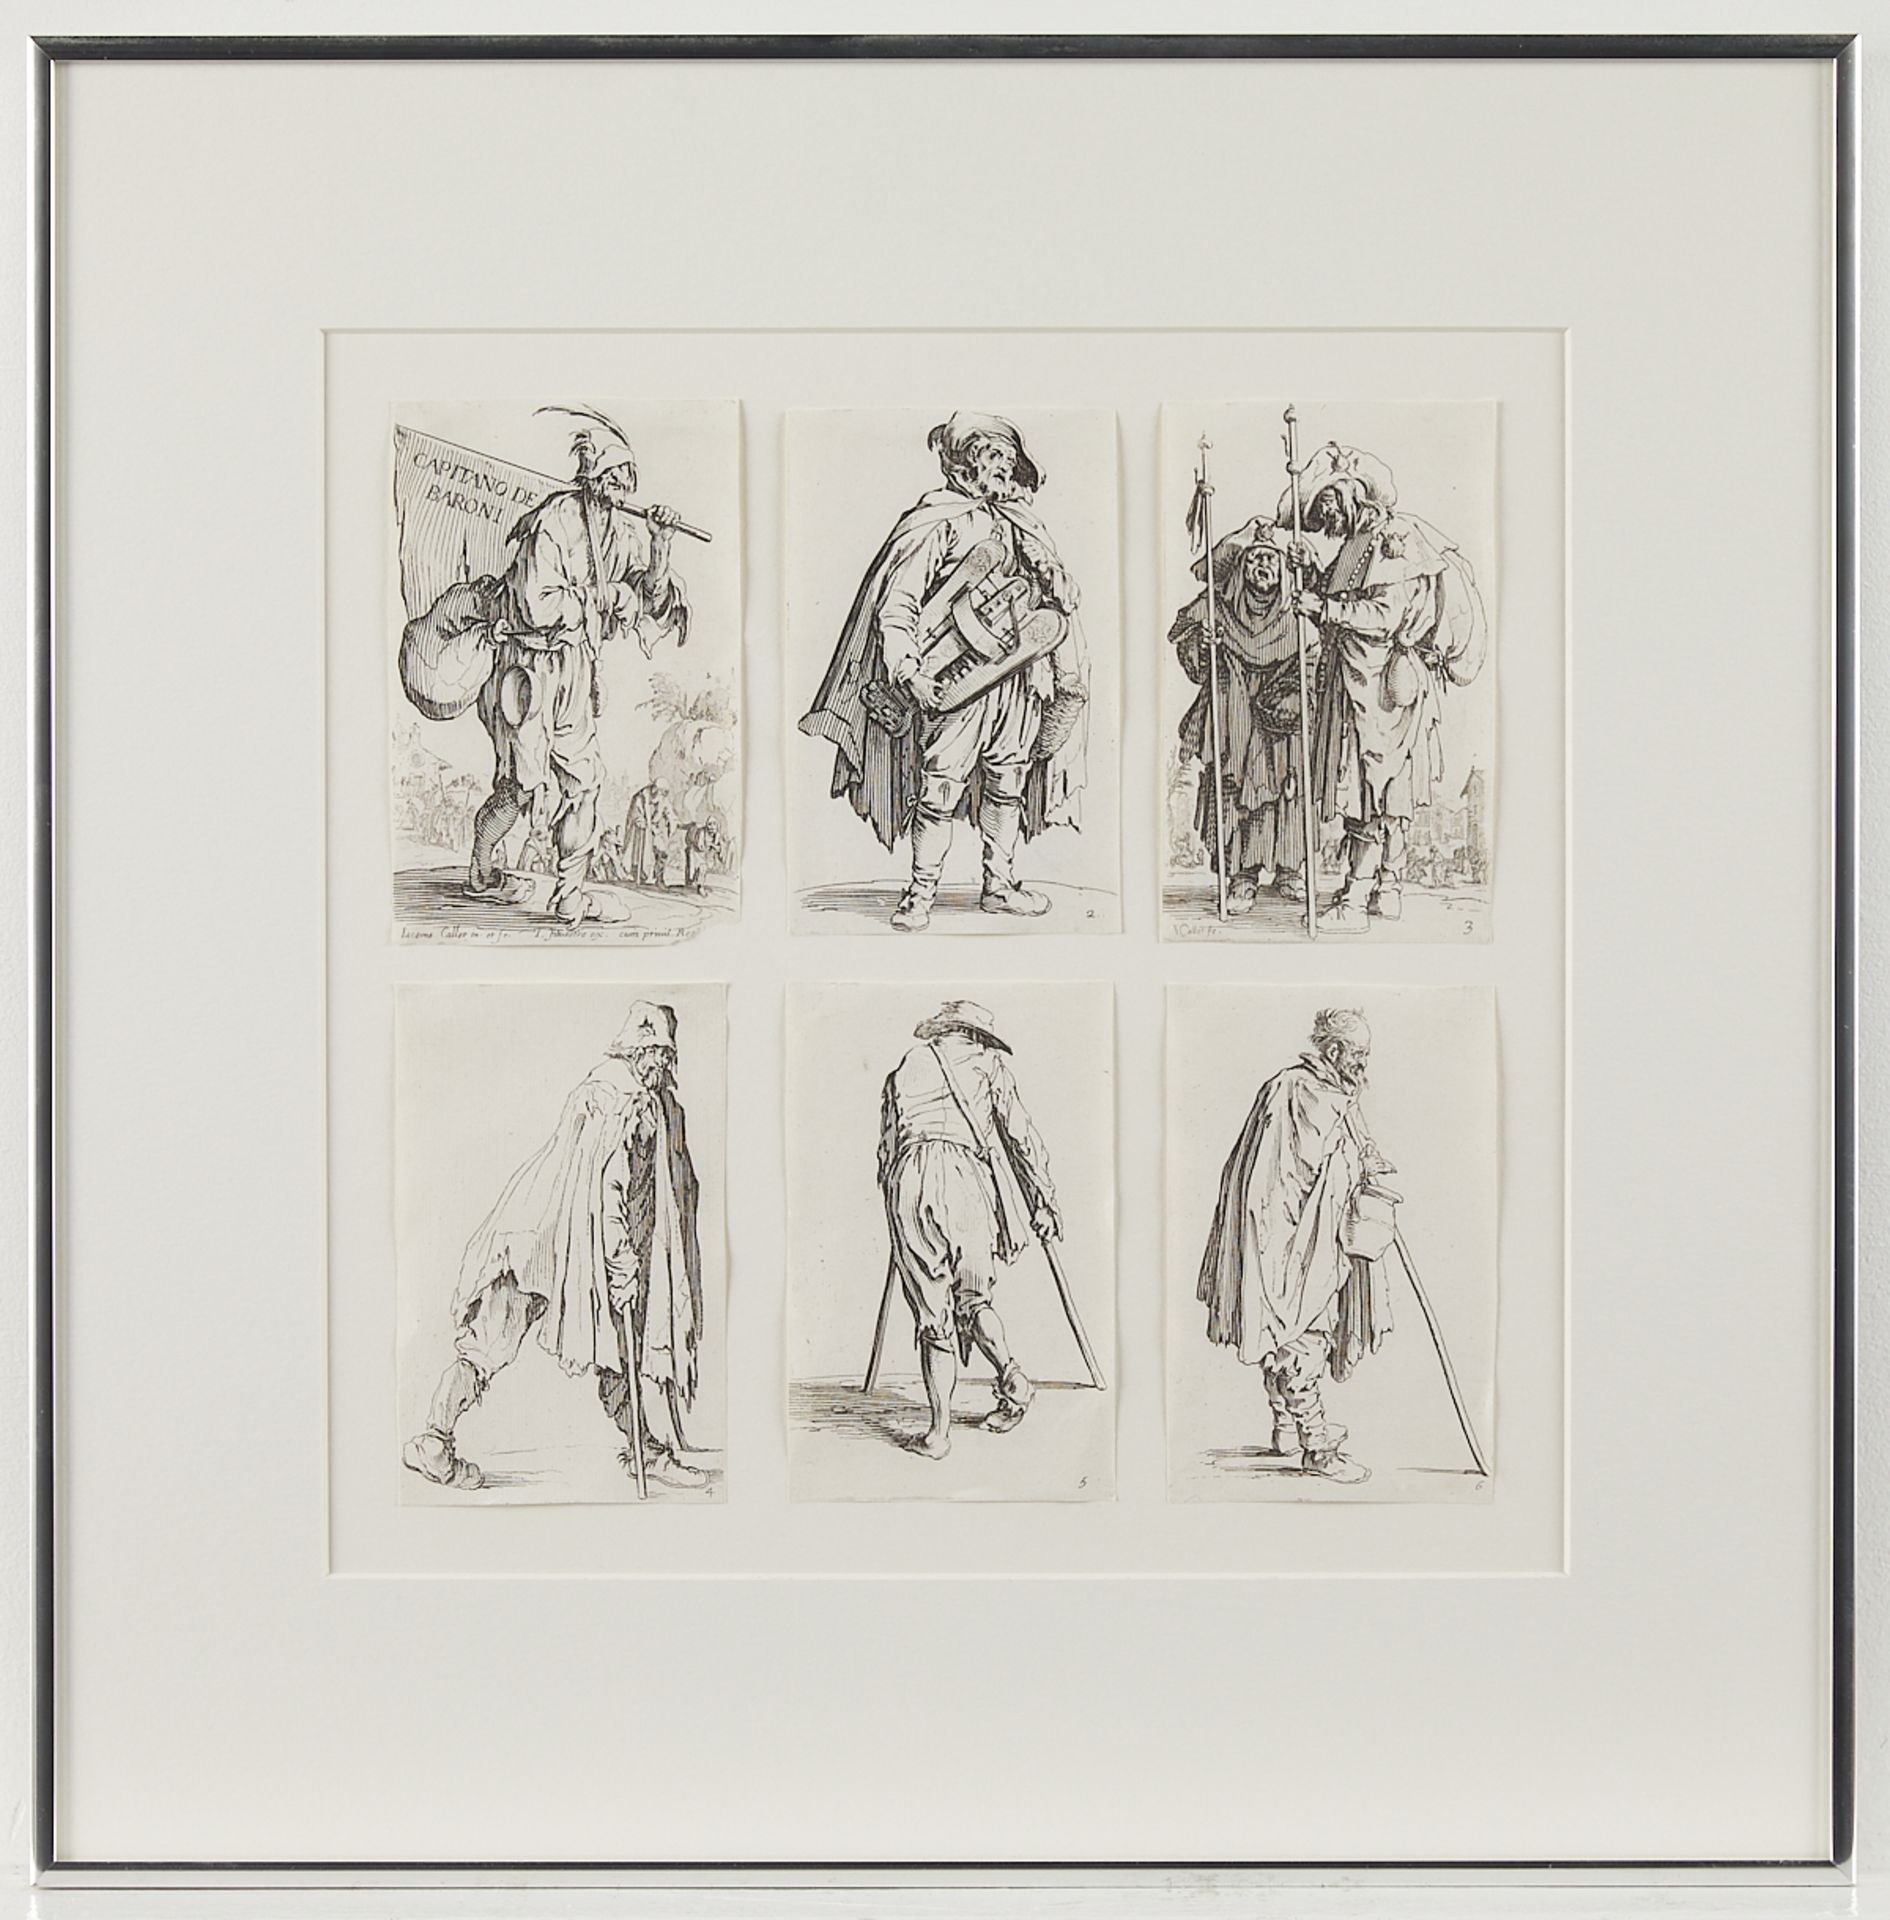 26 Etchings Jacques Callot "The Beggers" Suite - Image 9 of 25